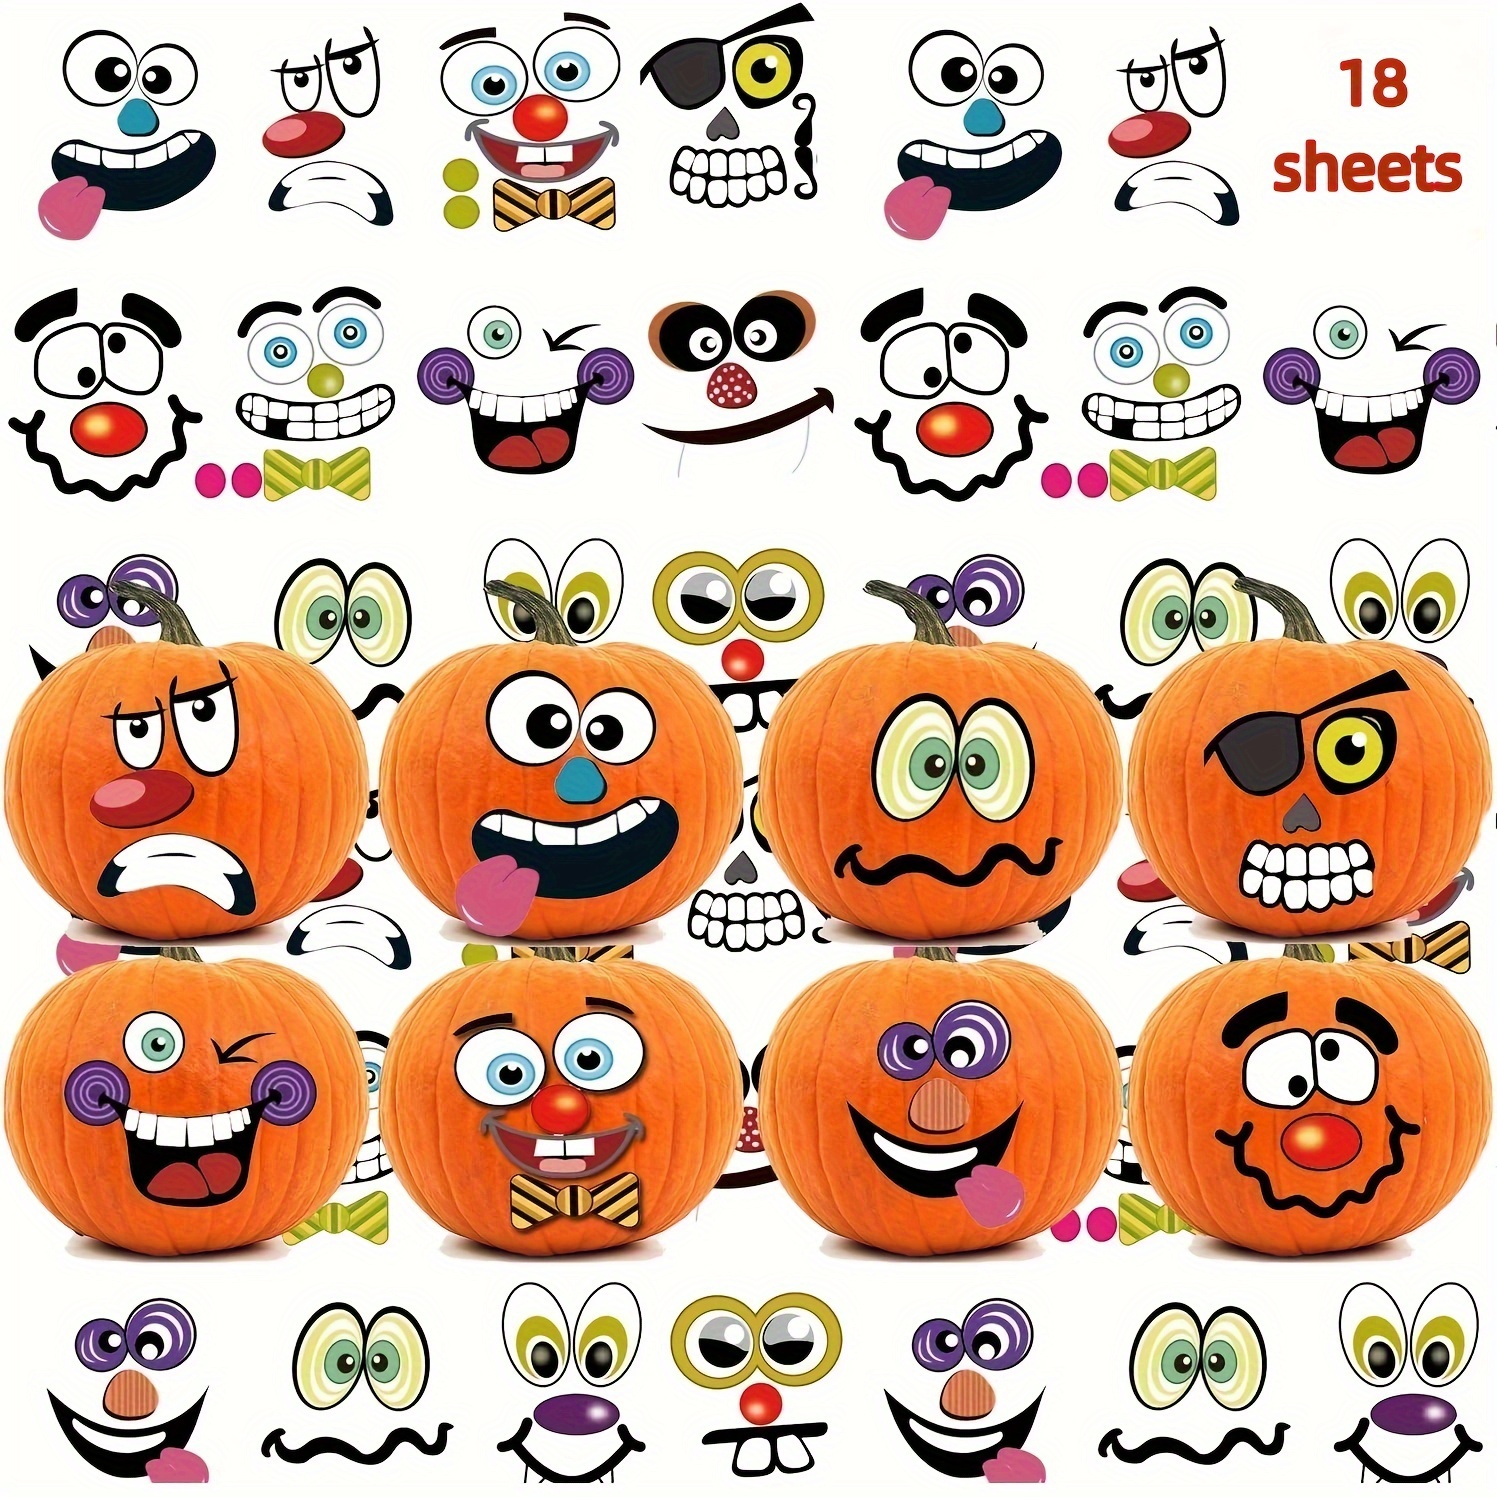 

Halloween Pumpkin Face Stickers - 18 Sheets With 12 Unique Designs For Parties & Treat Bags, Perfect For Decorating And Fun Crafting